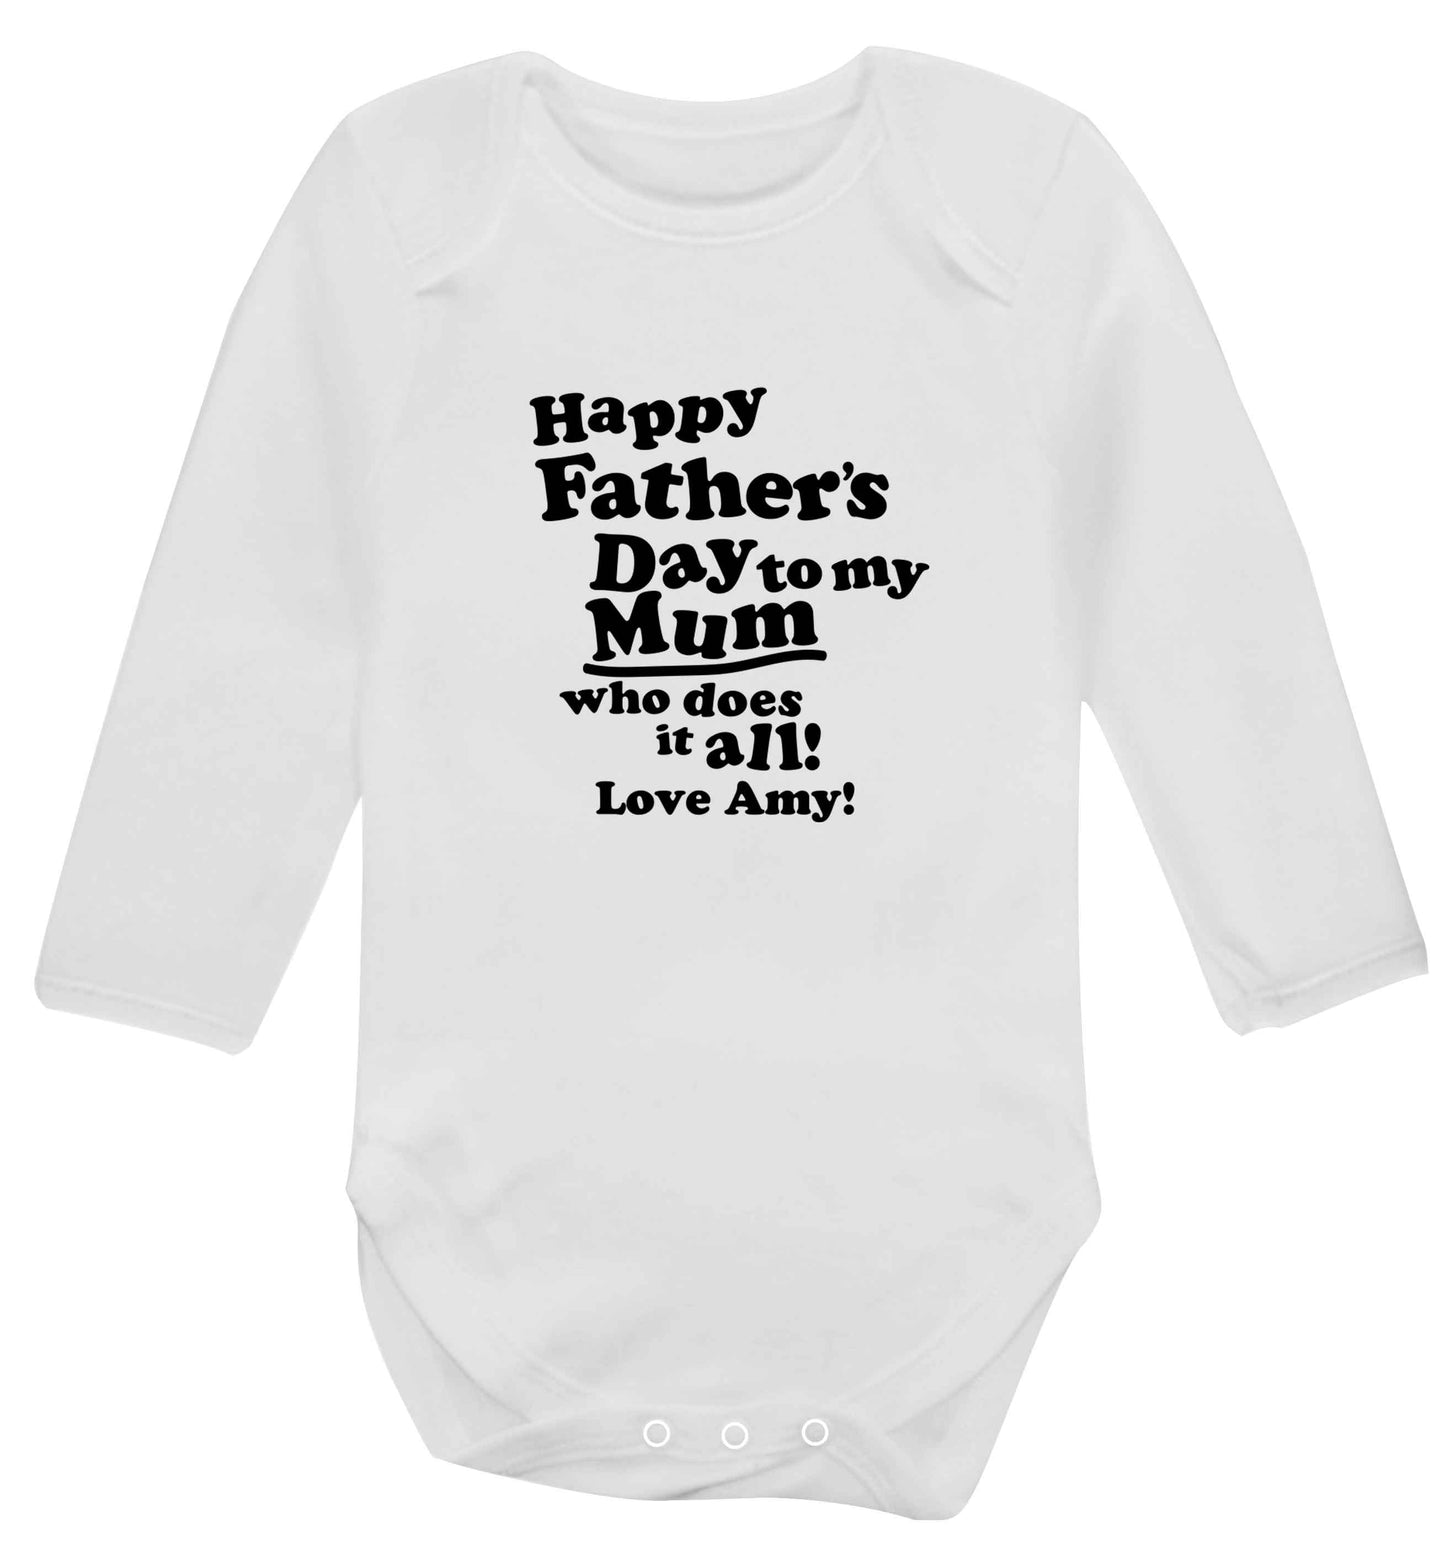 Happy Father's day to my mum who does it all baby vest long sleeved white 6-12 months